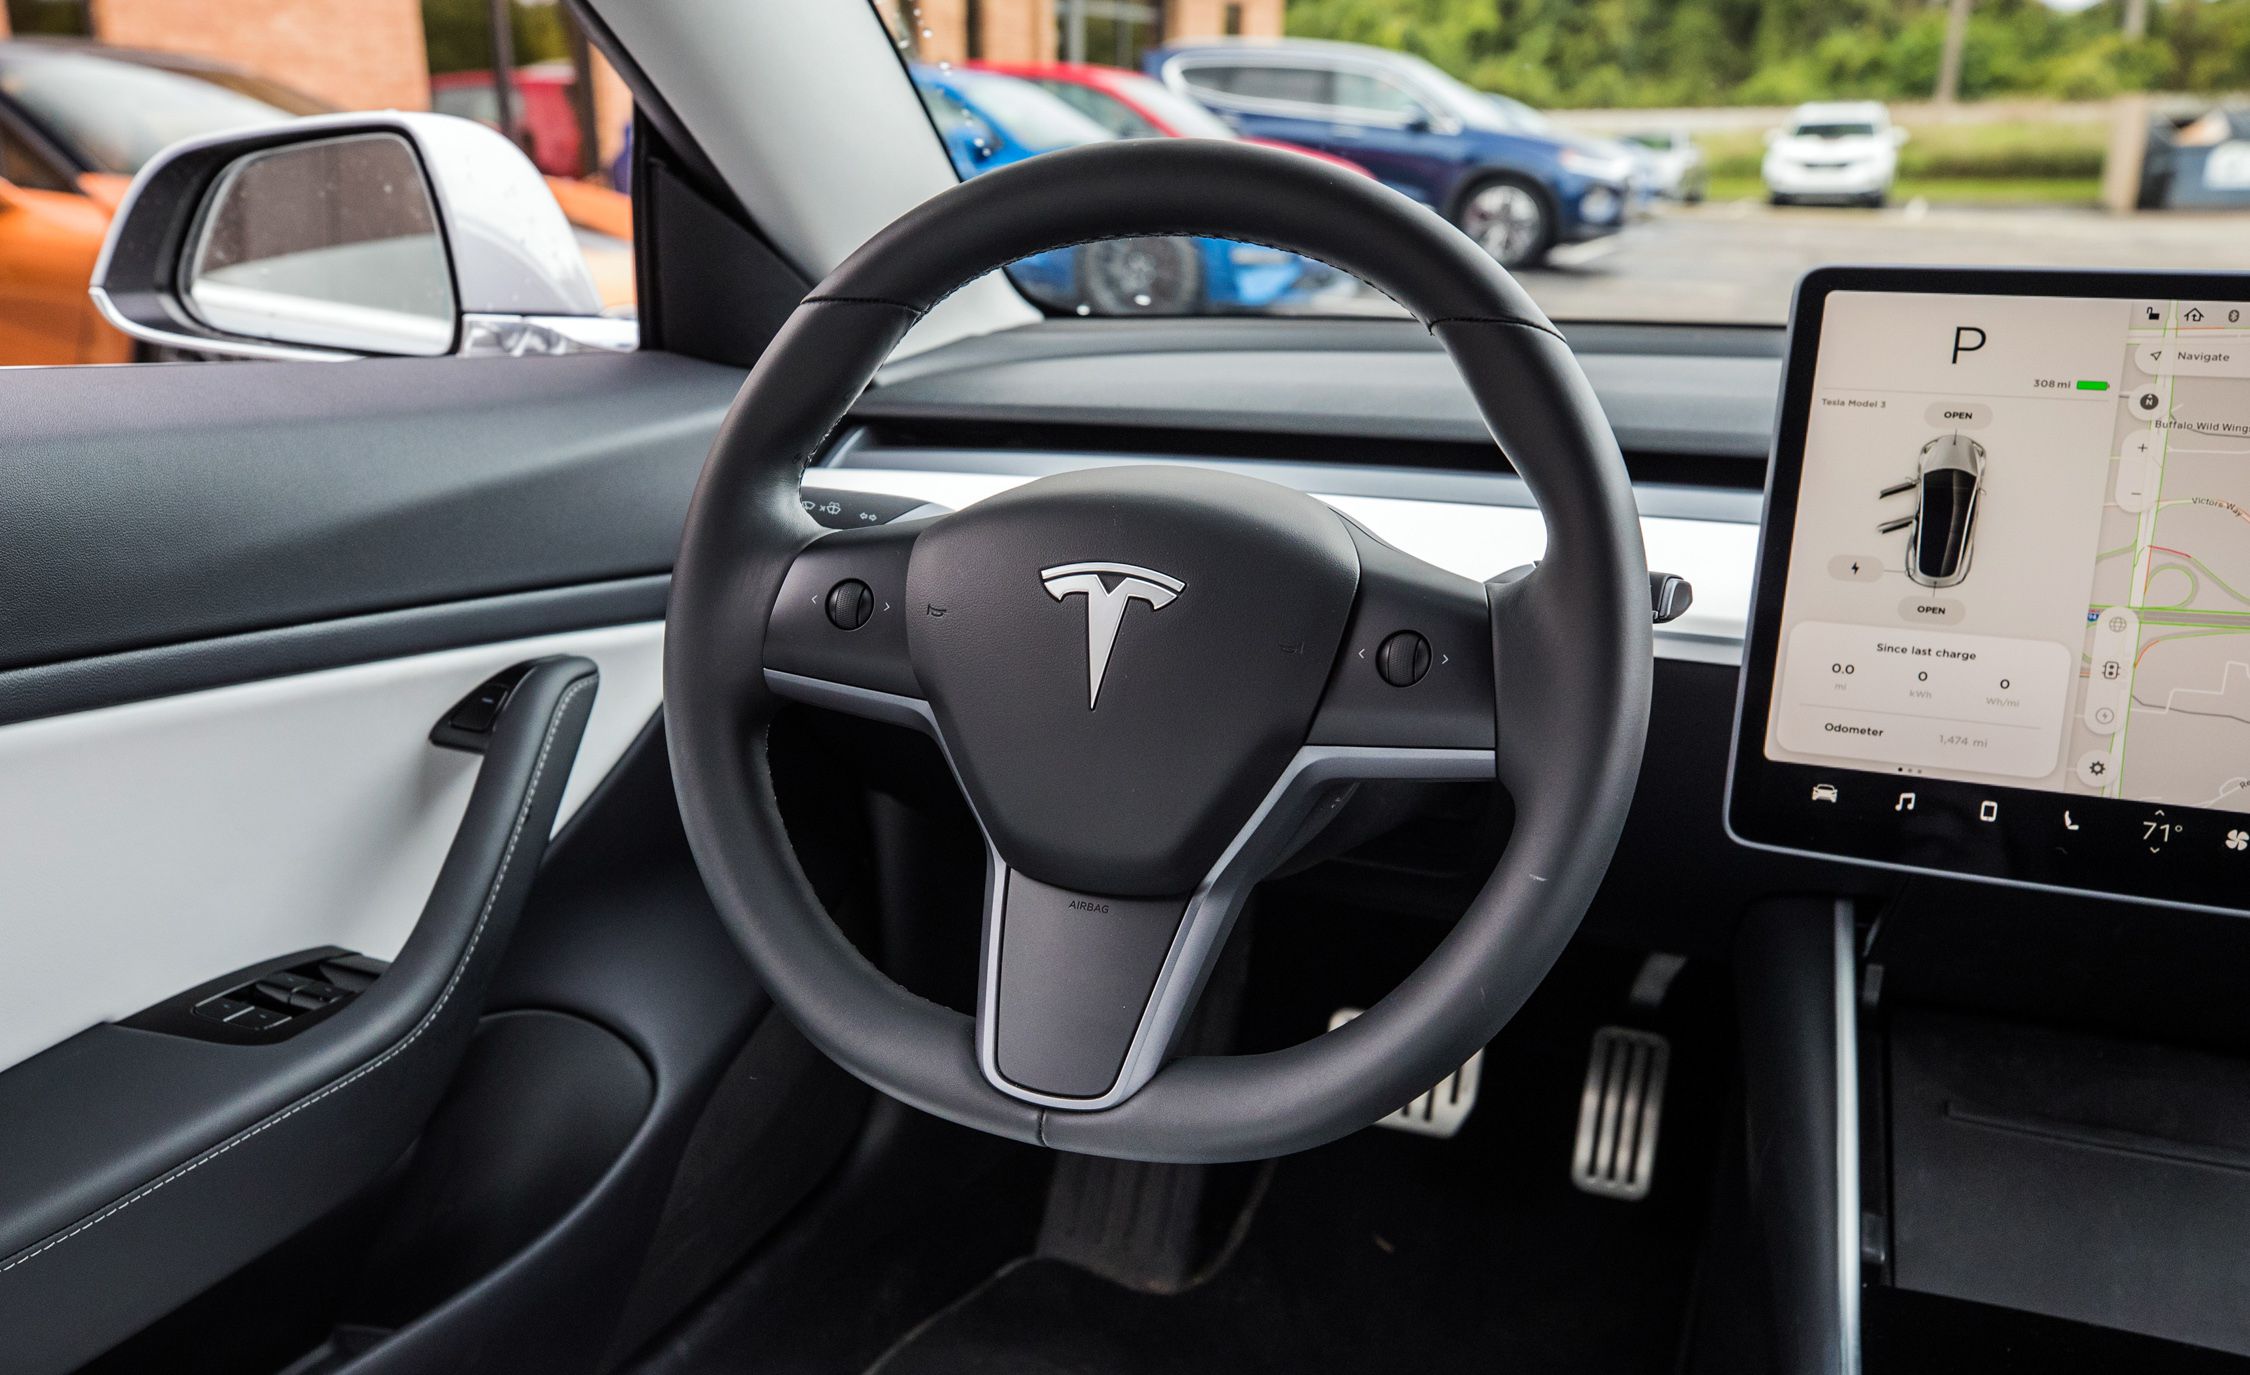 Former Tesla confesses to having sent company codes to iCloud